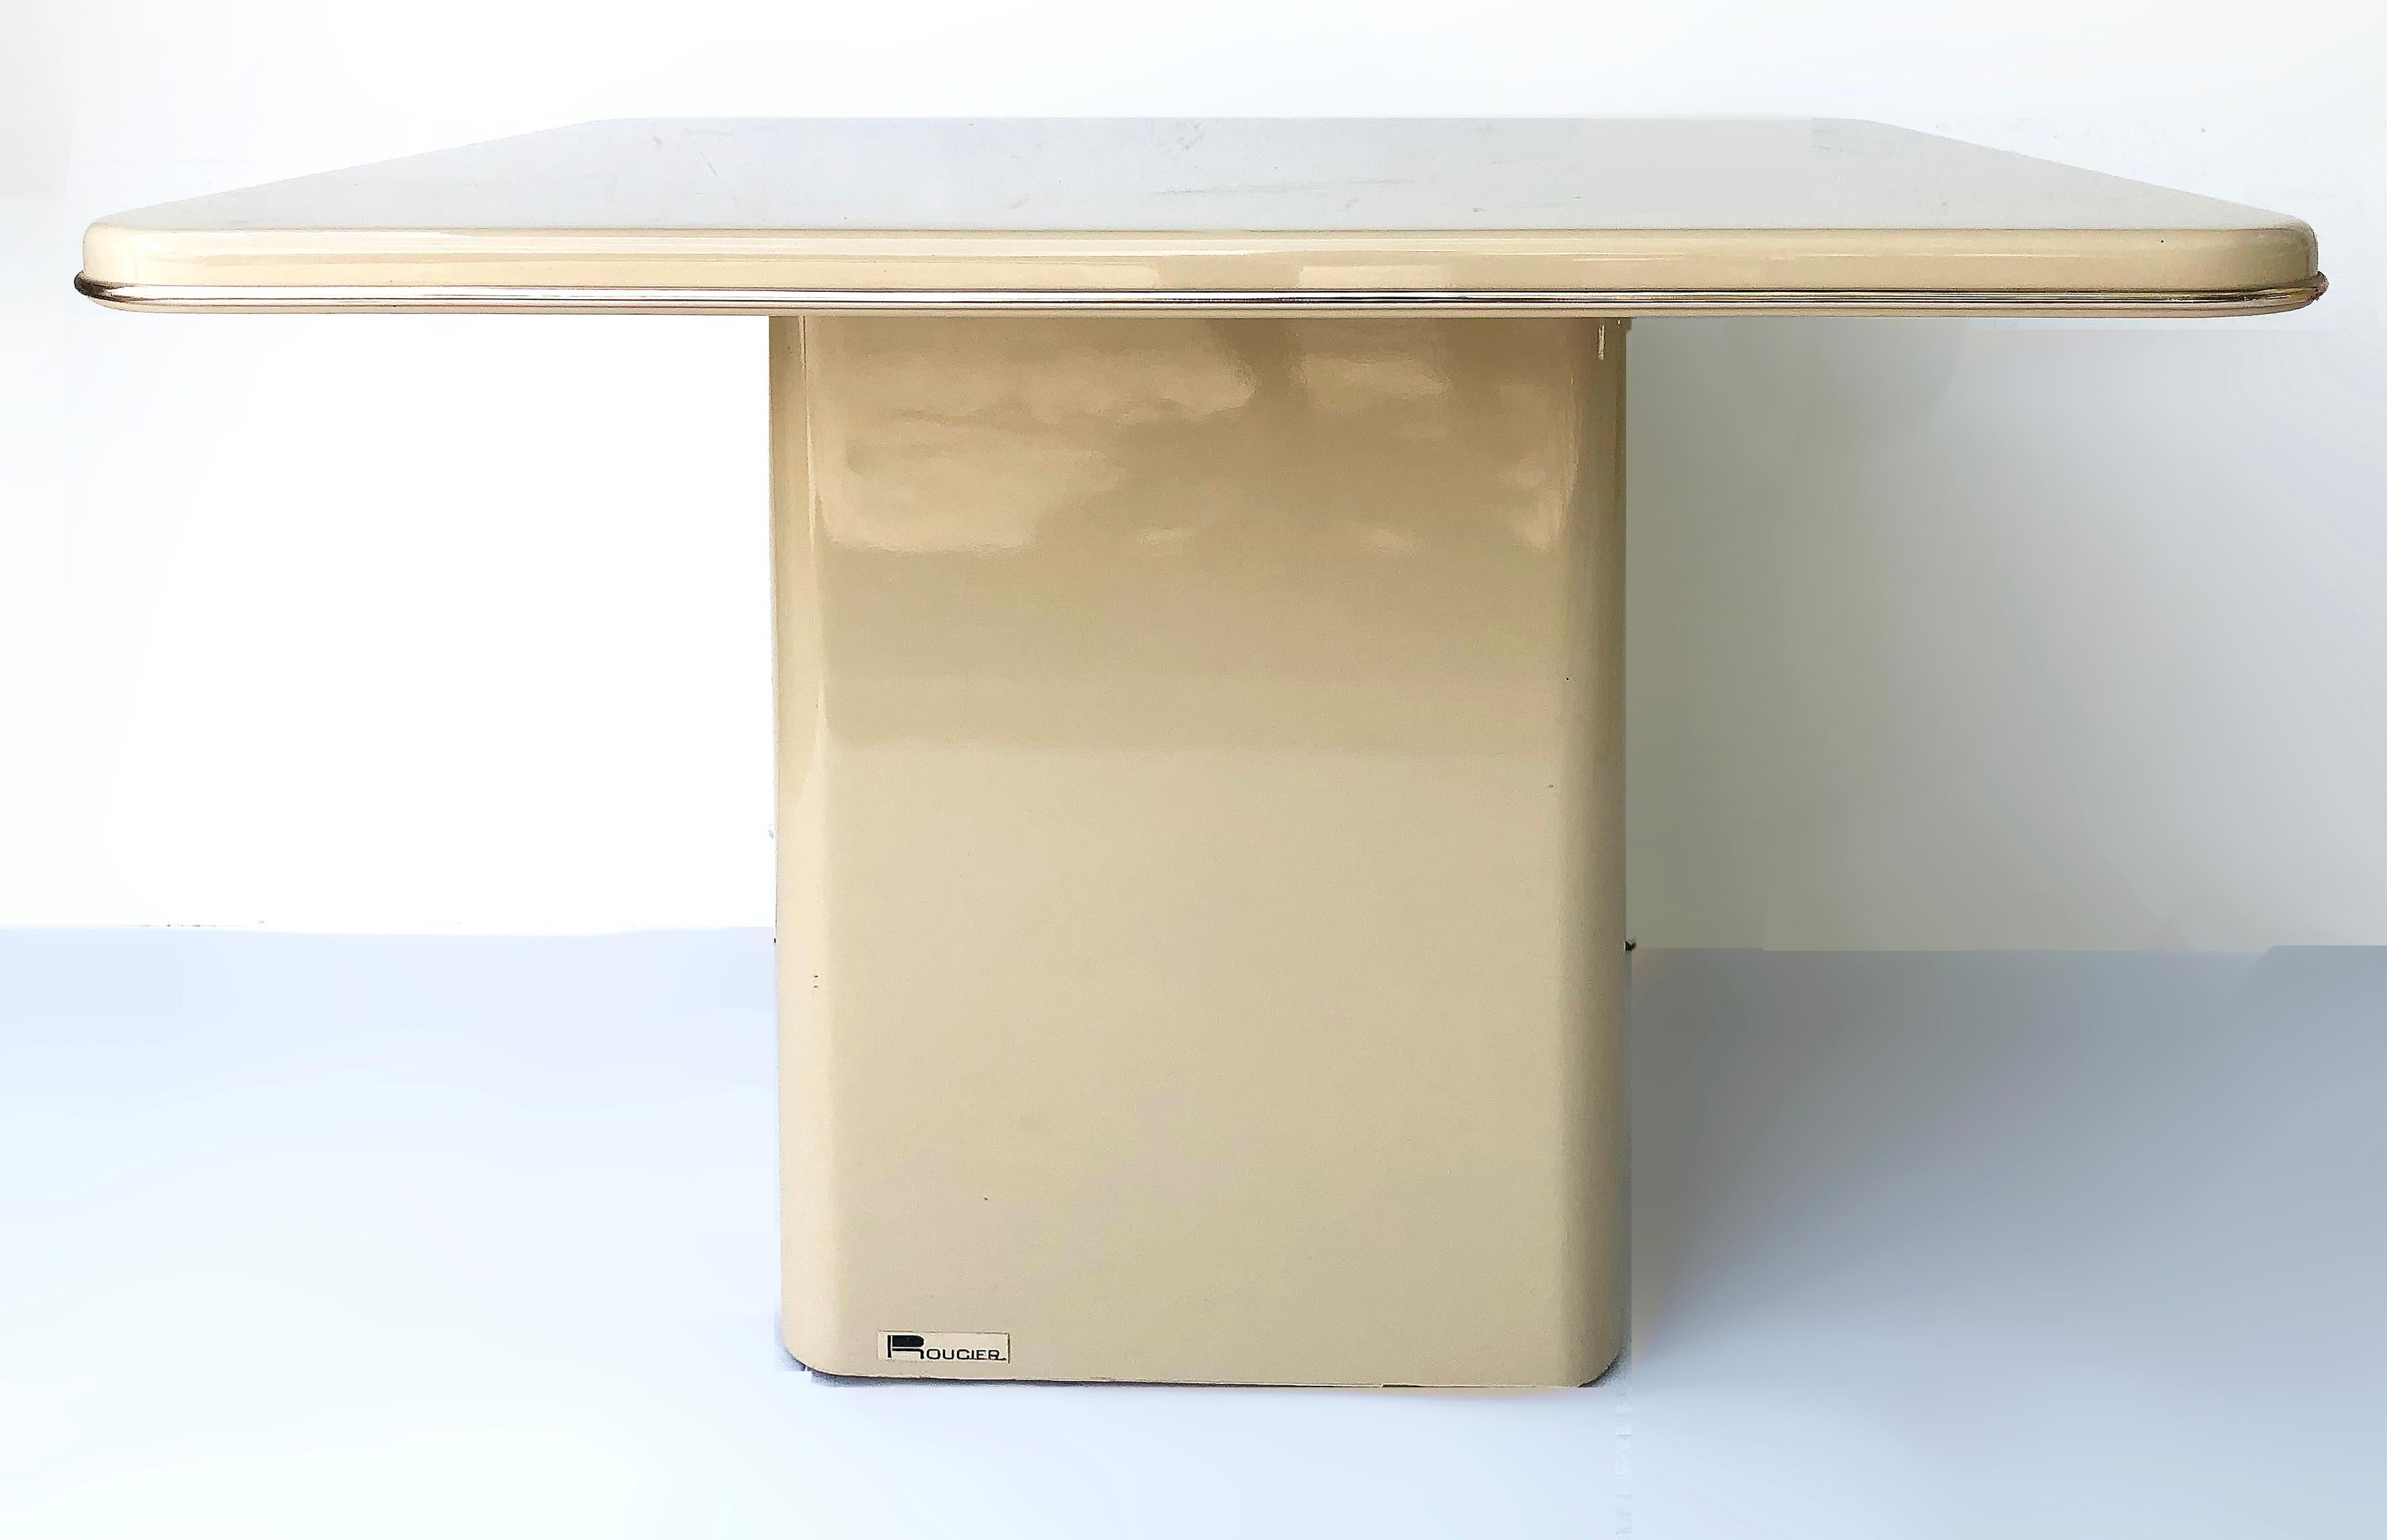 Vintage postmodern rougier sculptural side tables, 1980s


Offered for sale is a pair of vintage 1980s Postmodern Rougier side tables created in a sculptural form. The tables are laminate and have brass-tone trim surrounding them. The tops are